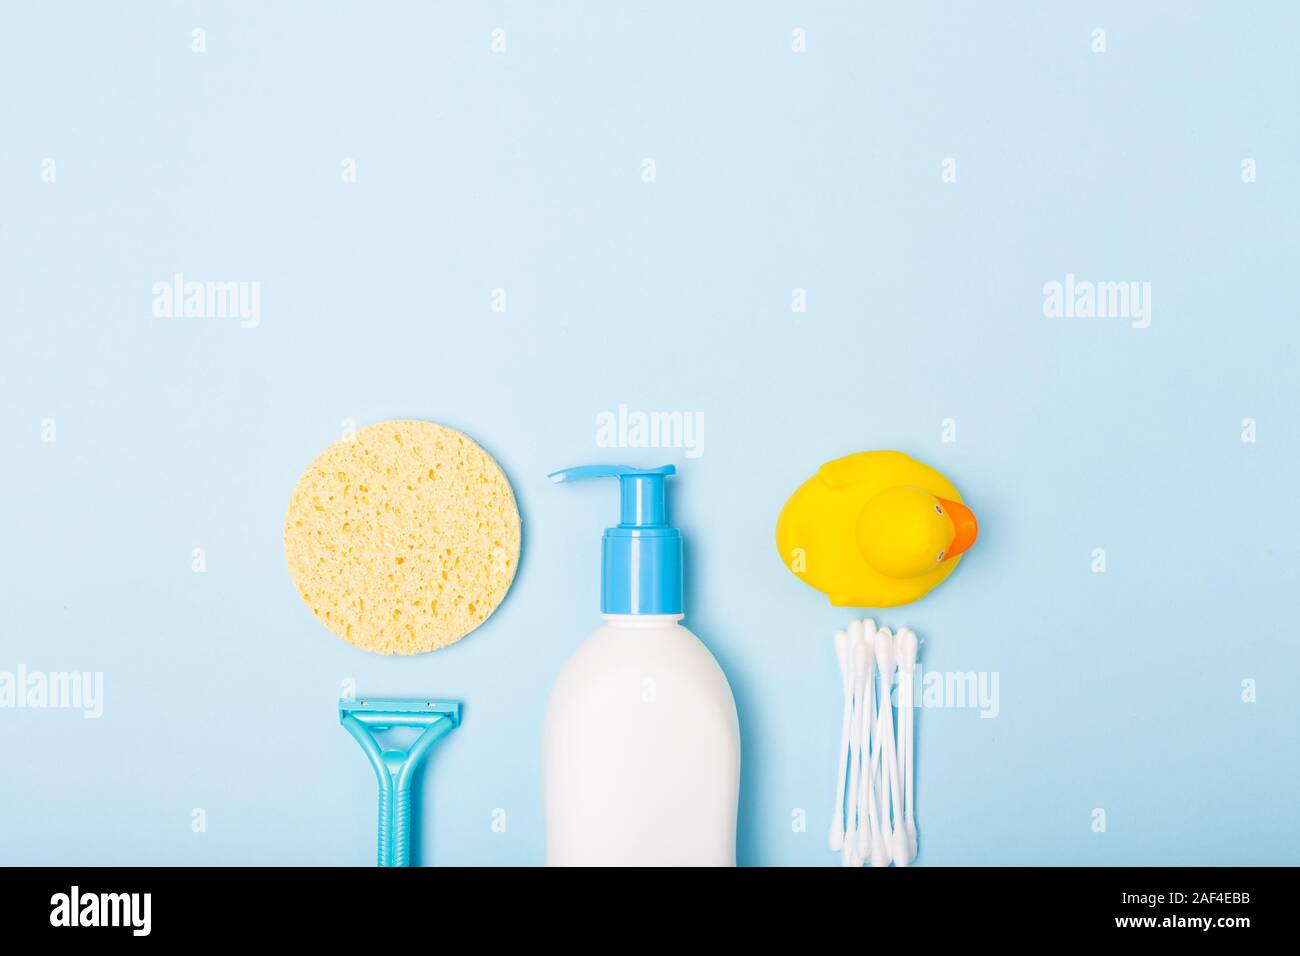 Top view. Woman Bath cleaning care morning routine flat lay composition with white, blue yellow items on light blue desk Stock Photo